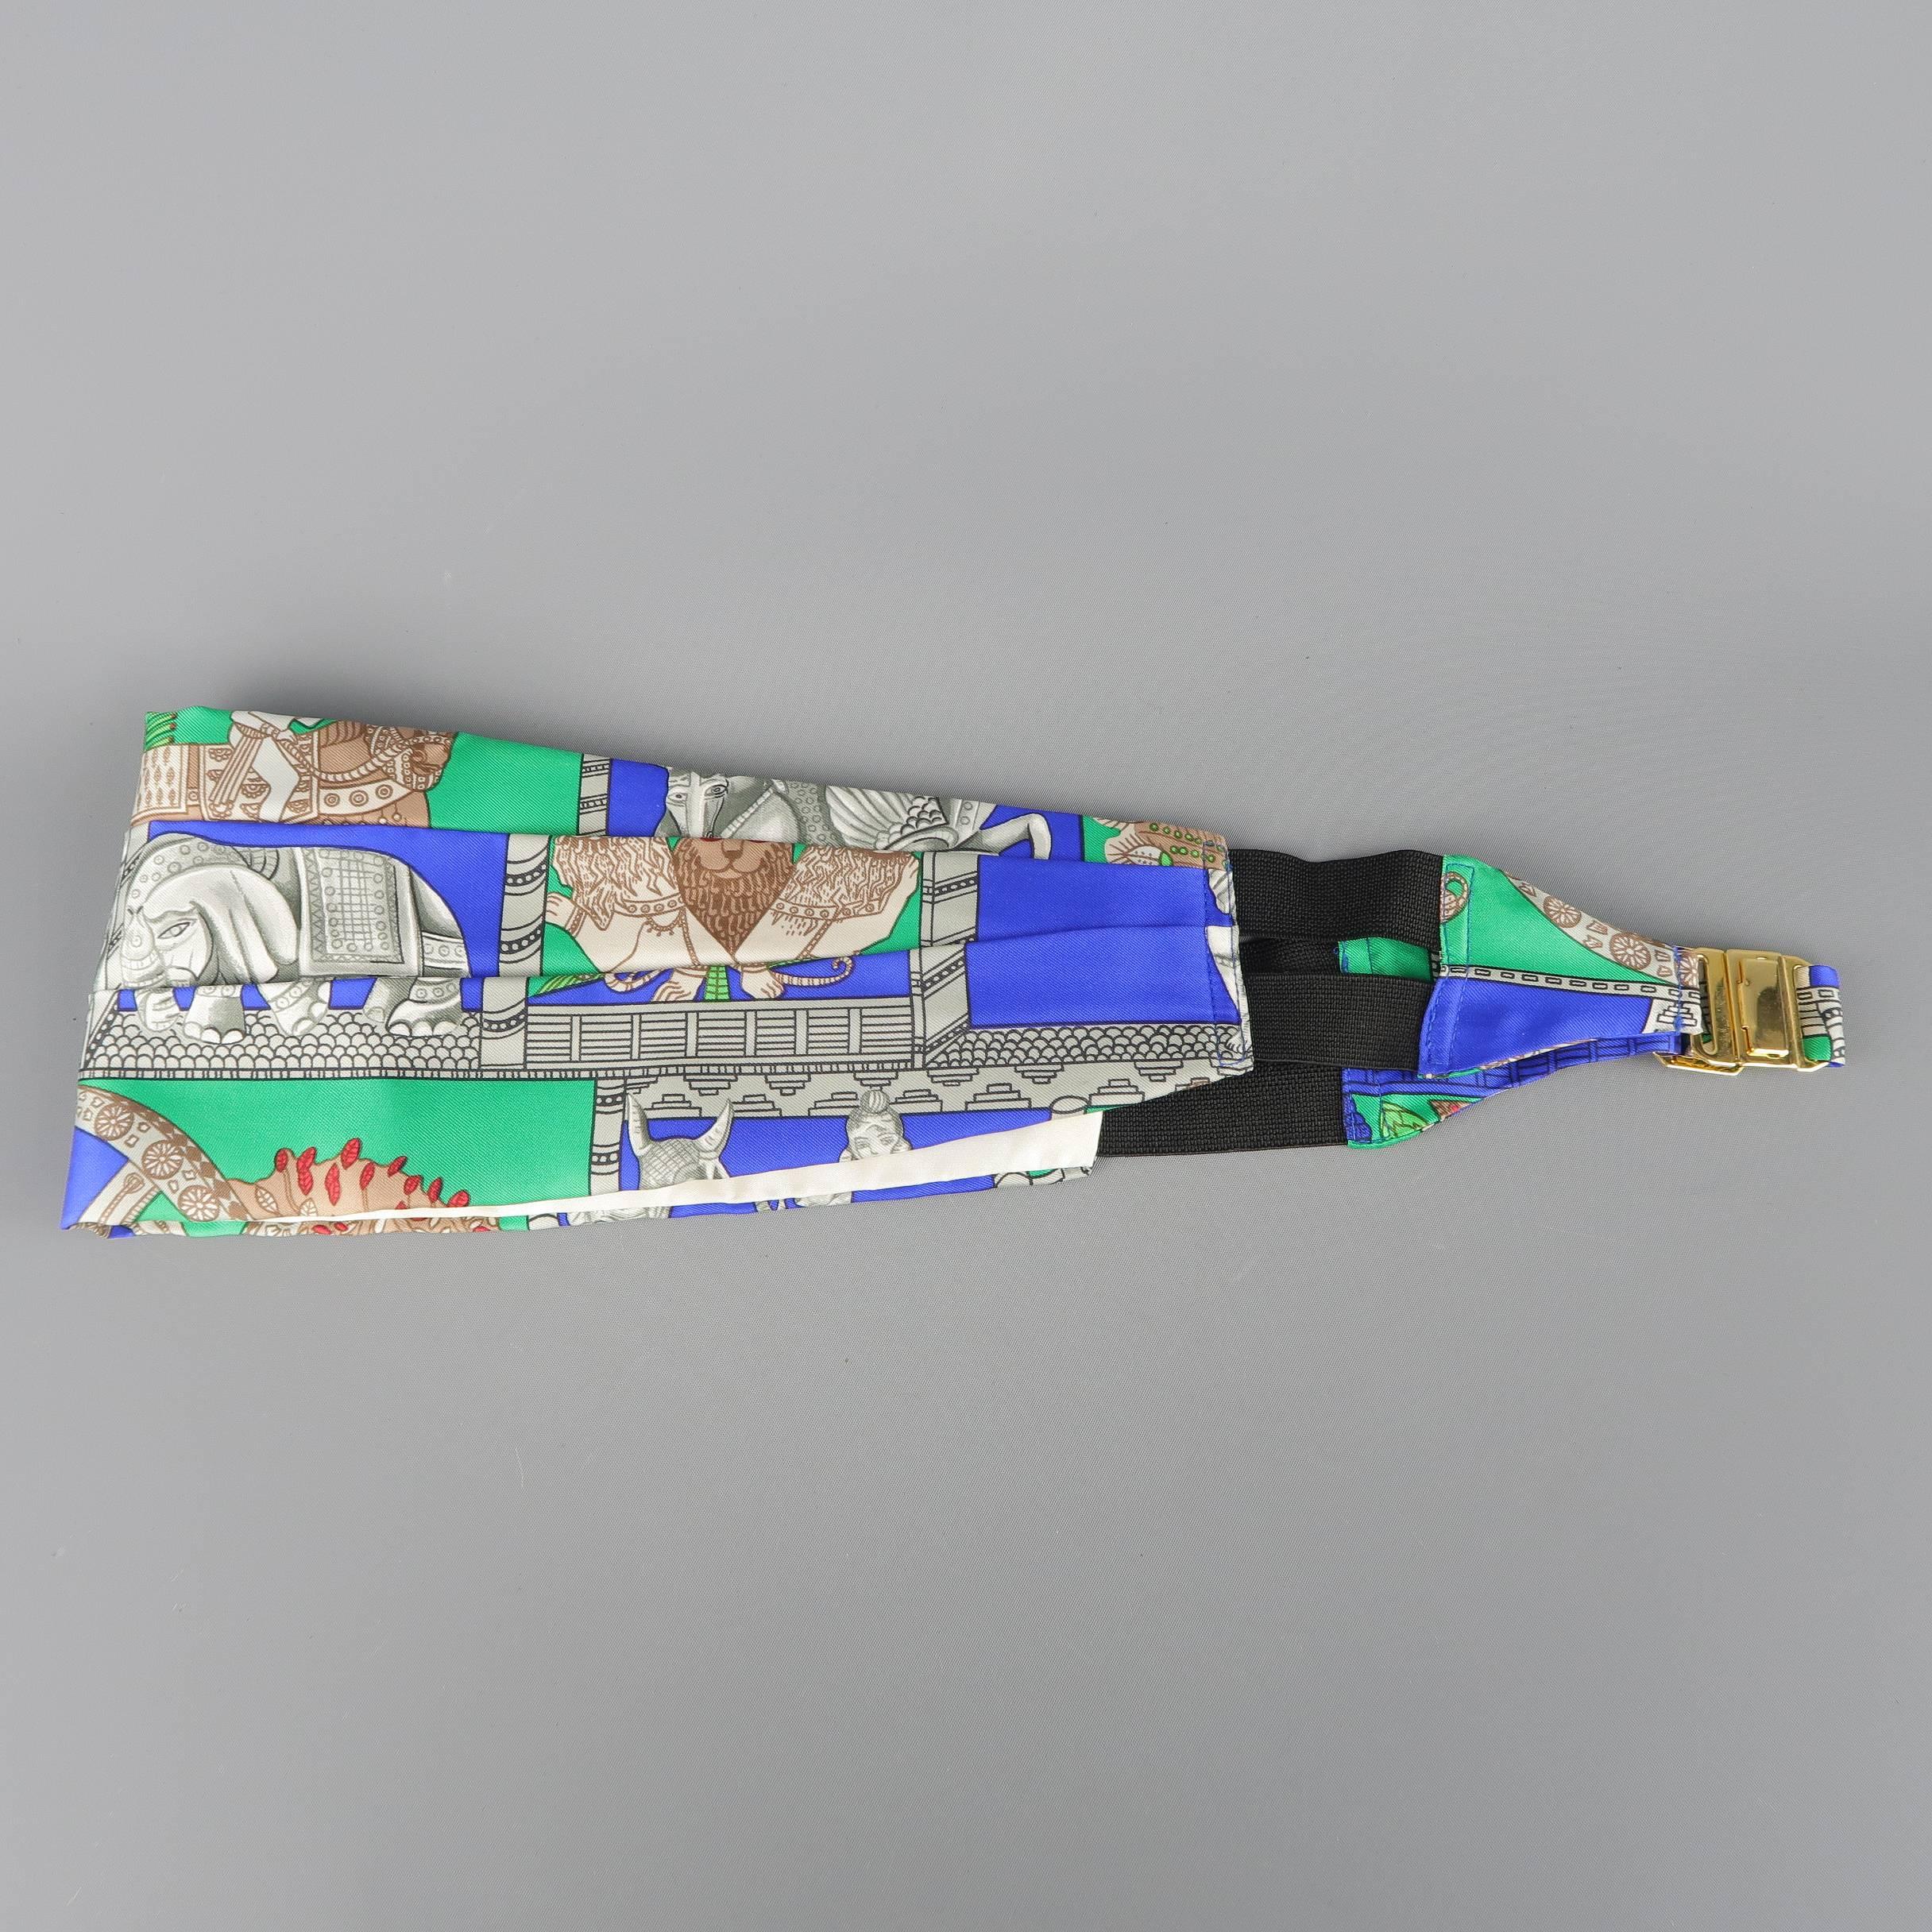 Vintage HERMES pleated cummerbund  comes in green silk twill with all over blue, gray, and taupe Indian Torana print depicting elephant and lion statues. With box. Made in France.
 
Excellent Pre-Owned Condition.
Marked: FR 42
 
Measurements:
